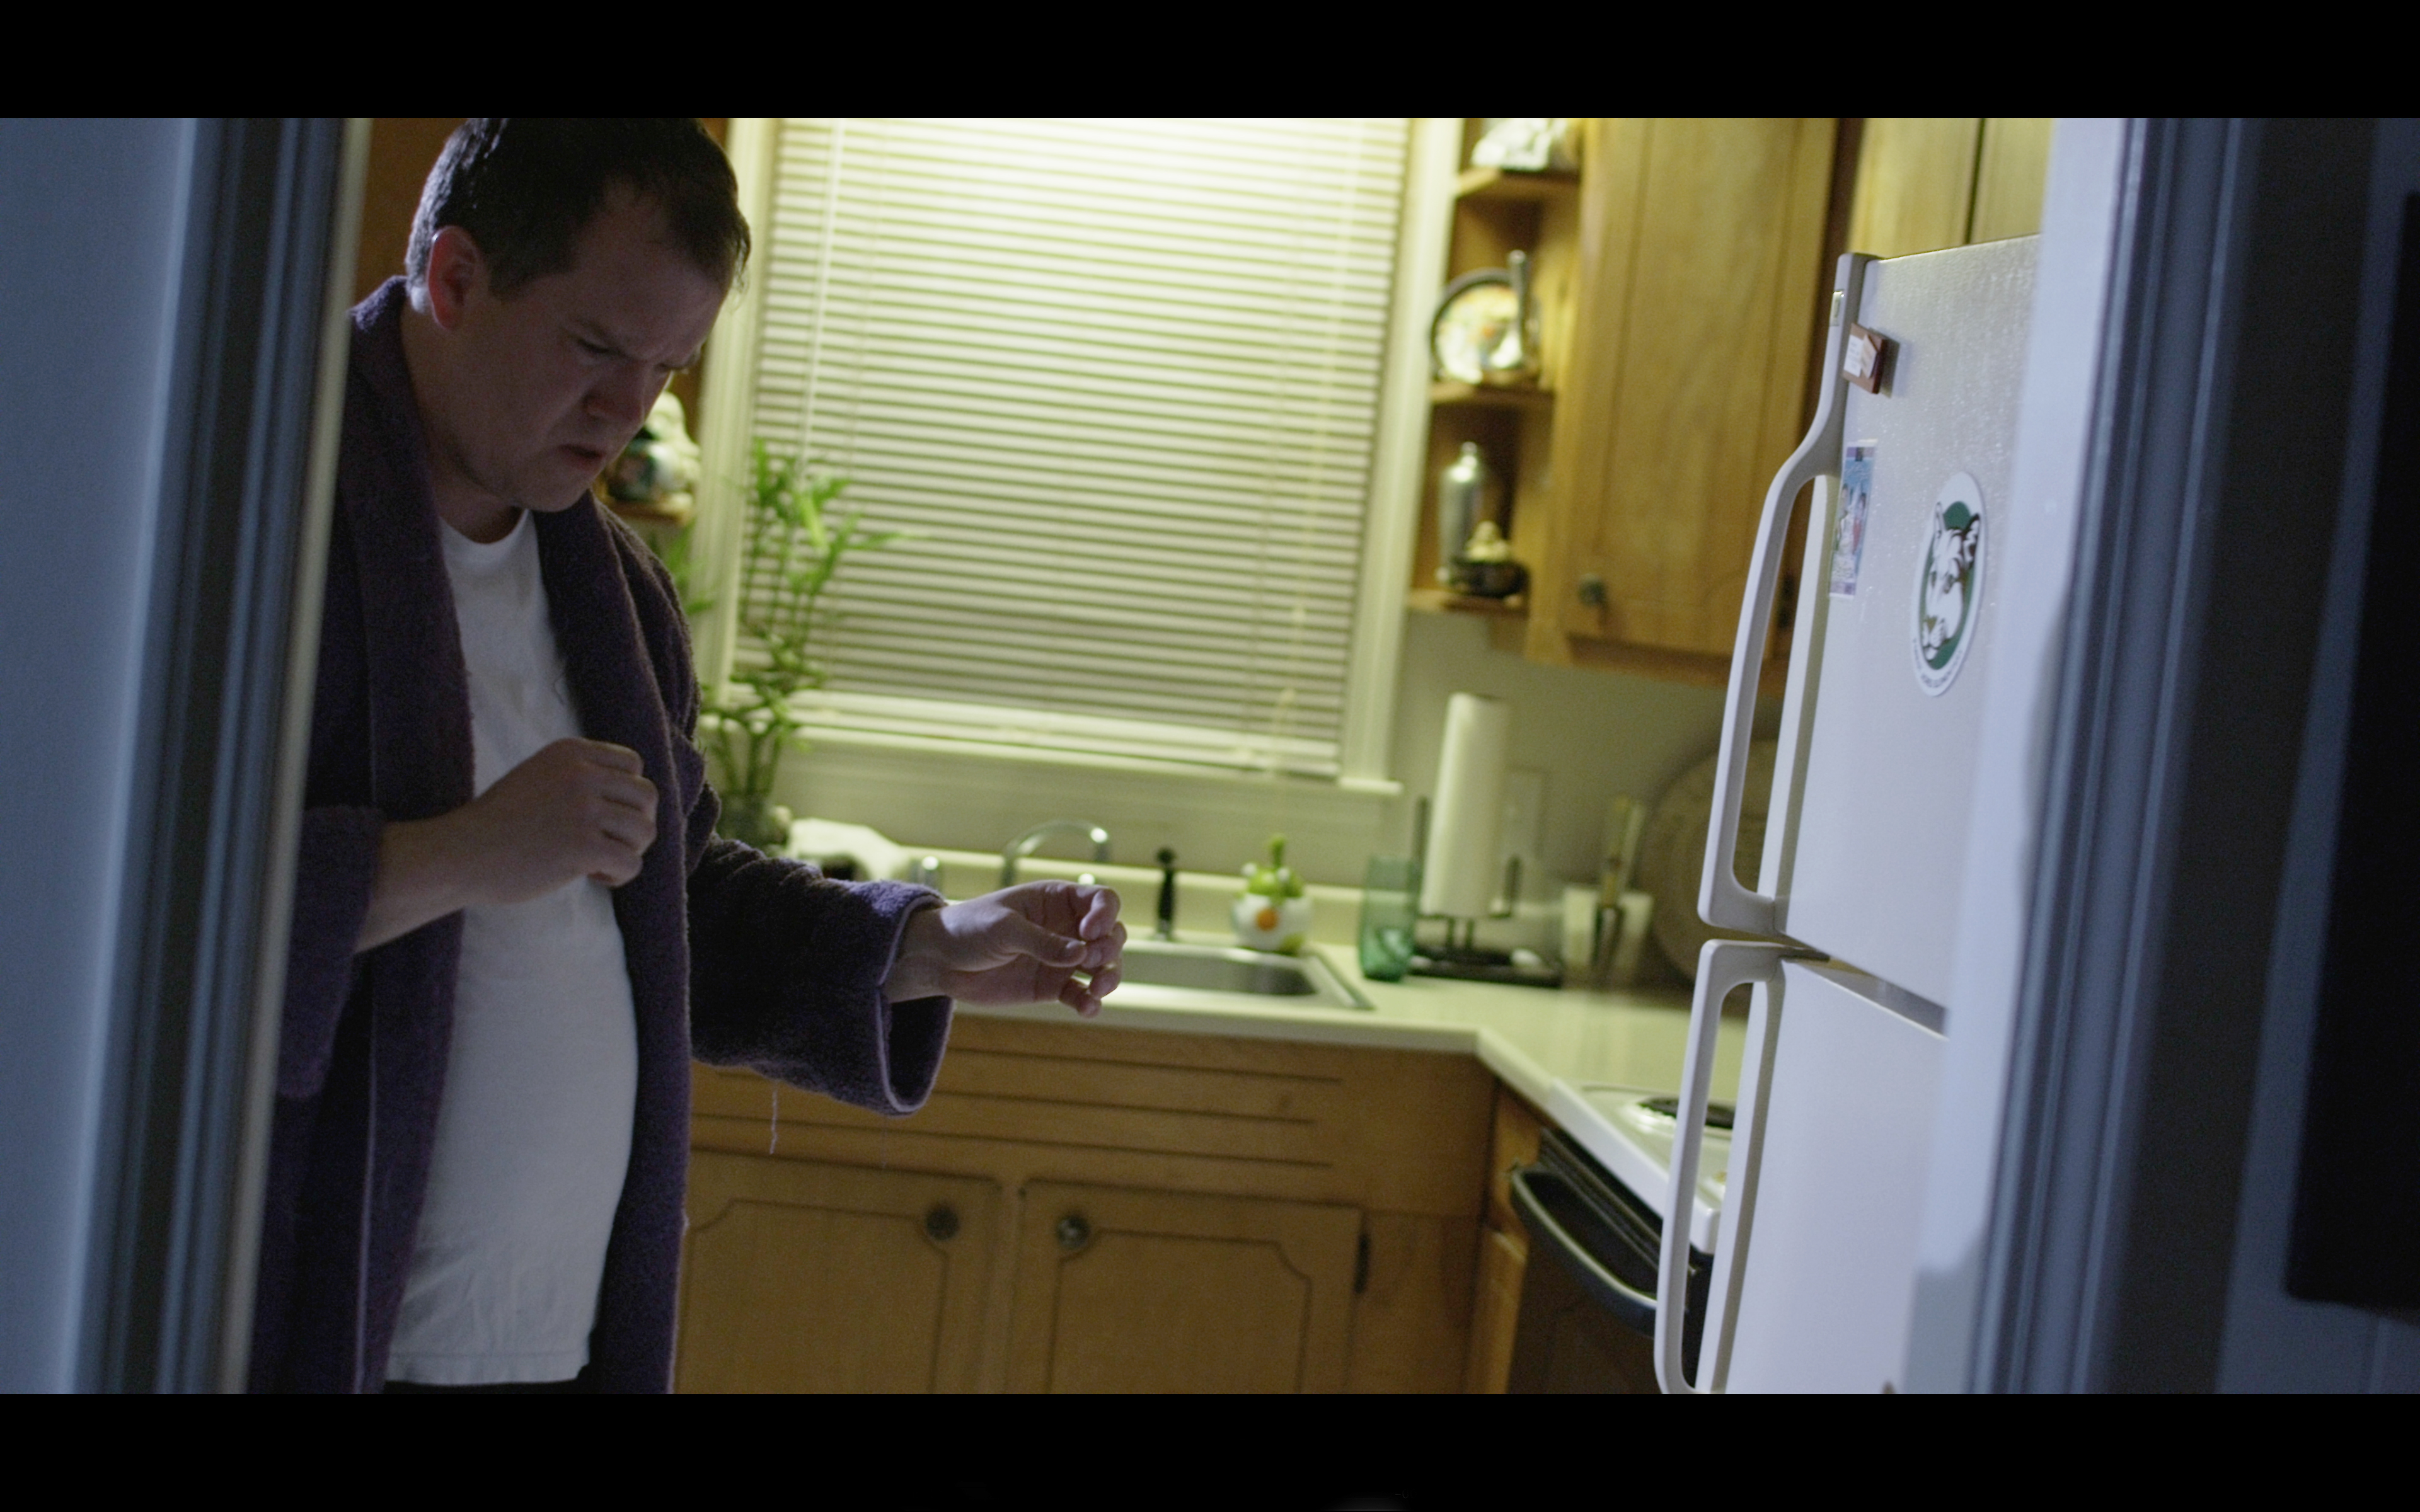 Film: Paranormal Therapy. Character: Patient. Director: Chris Gurtlinger. Shot on Red Epic Camera